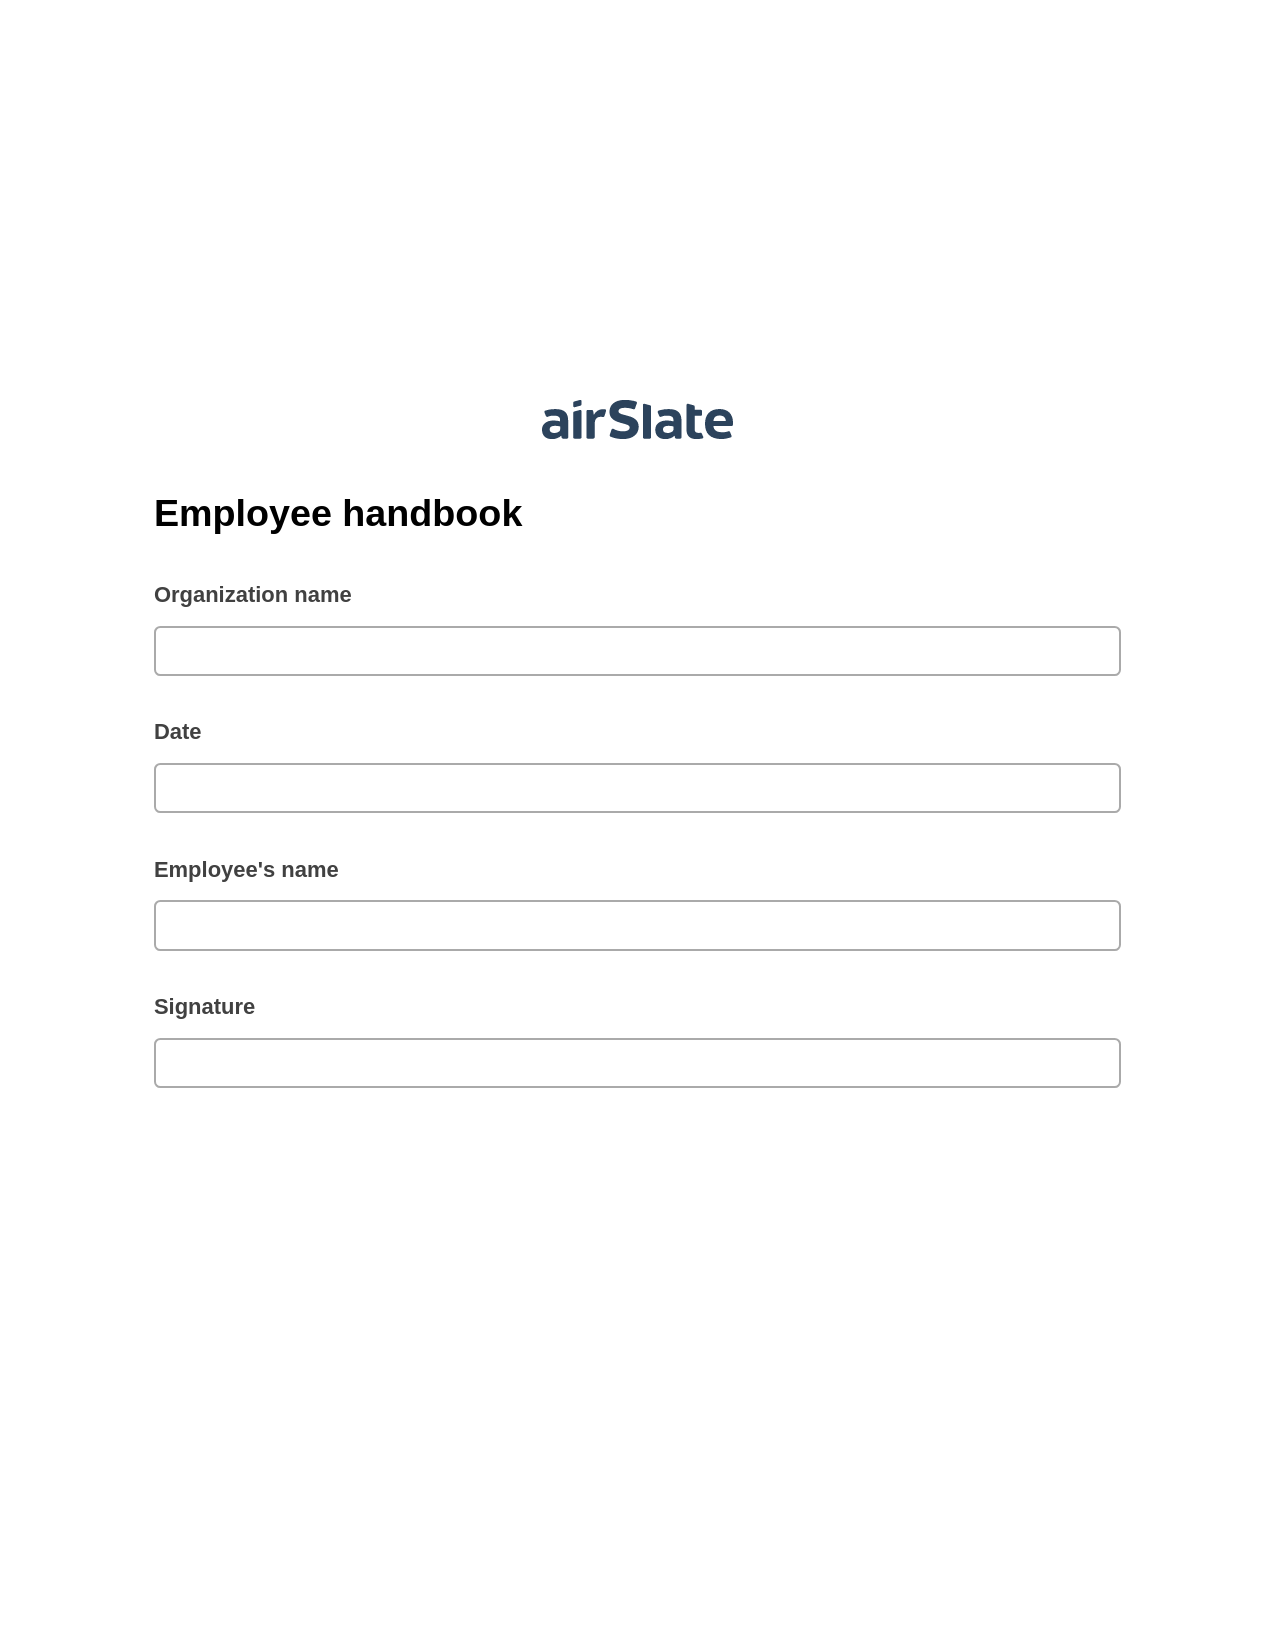 Multirole Employee handbook Pre-fill Slate from MS Dynamics 365 Records Bot, Remove Tags From Slate Bot, Export to Smartsheet